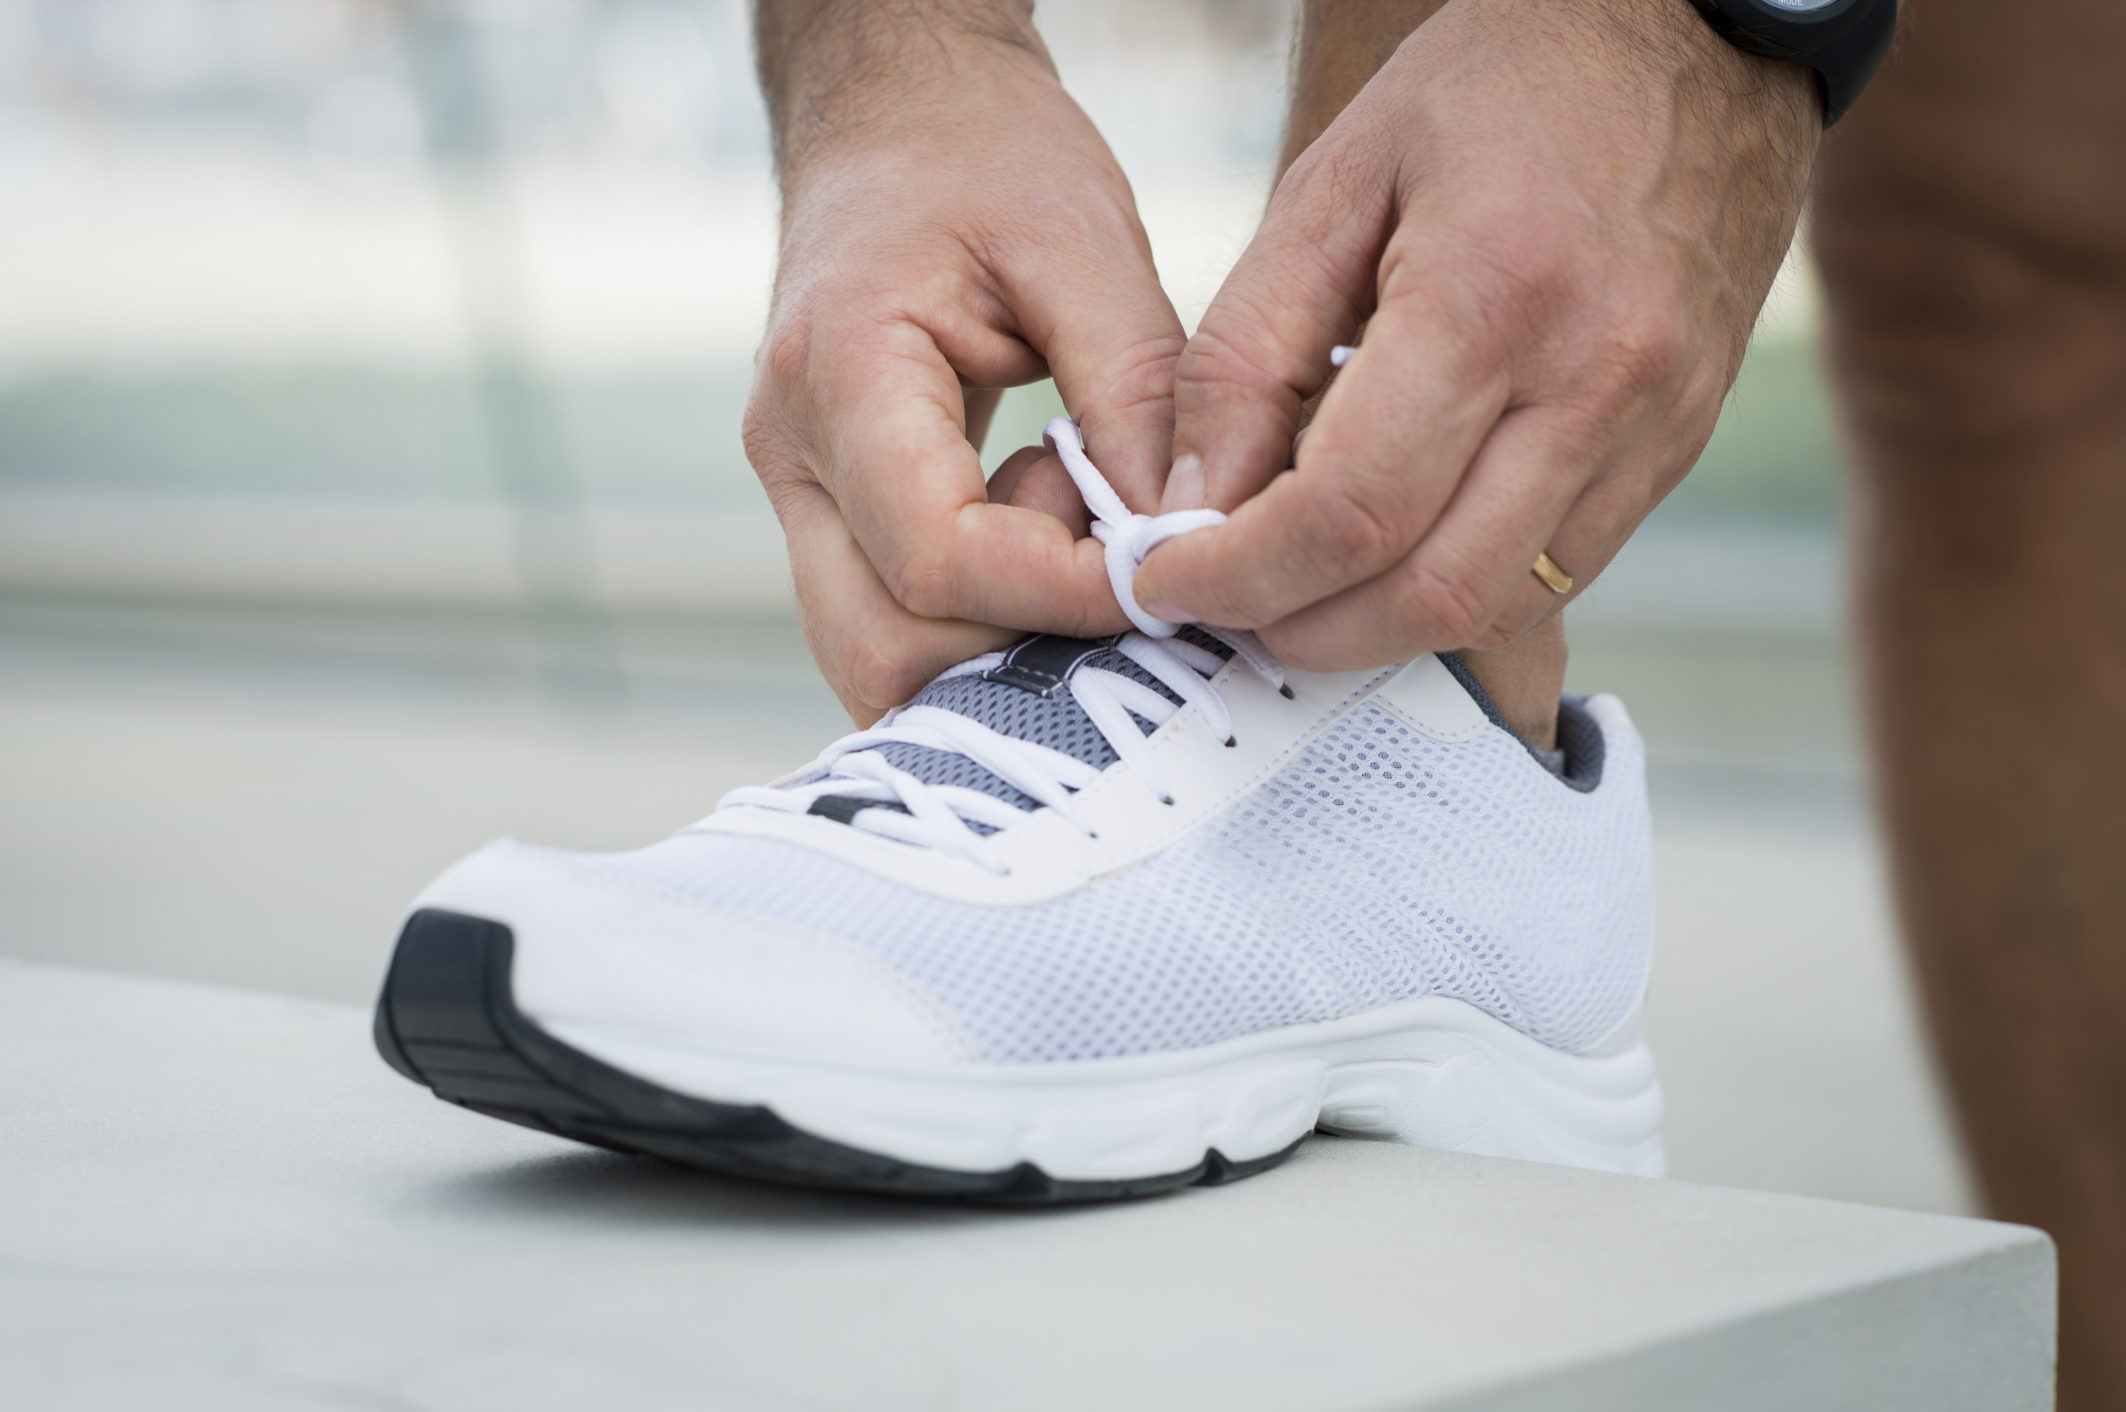 Why Is It Important to Wear Proper Shoes While Working Out